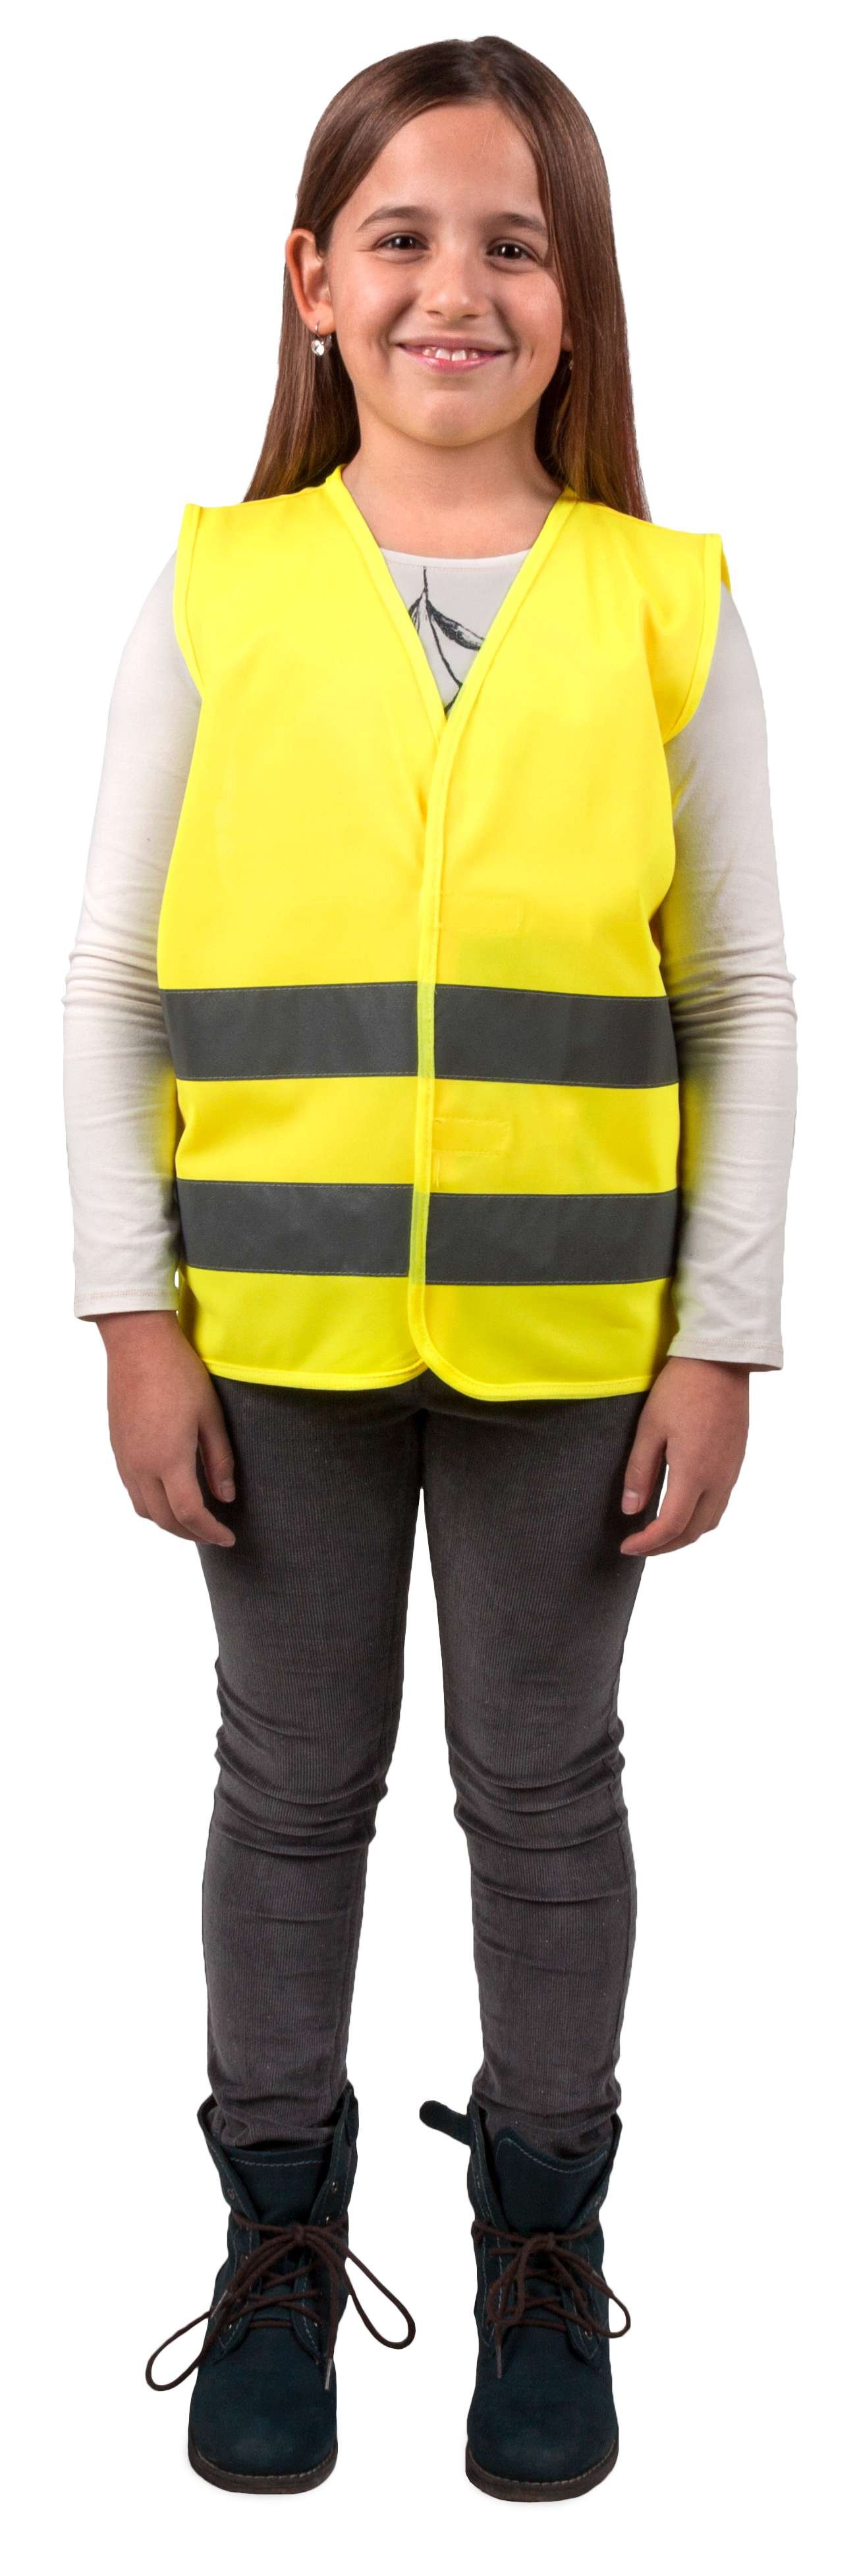 Safety vest size XS for children 3-6 years Yellow EN 1150